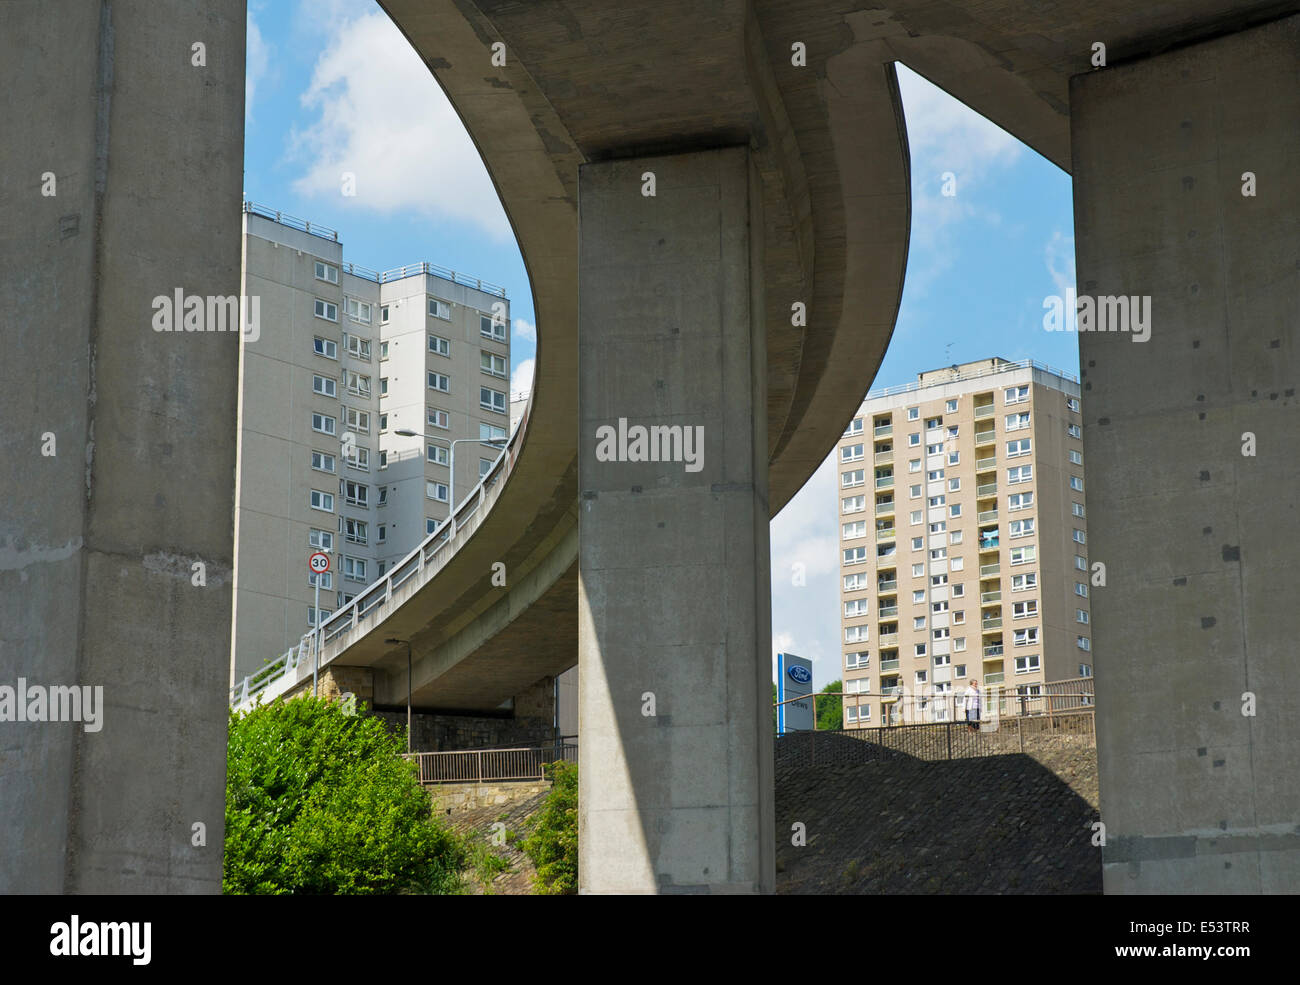 Flyover and high-rise flats: urban bleakness in Halifax, West Yorkshire, England UK Stock Photo